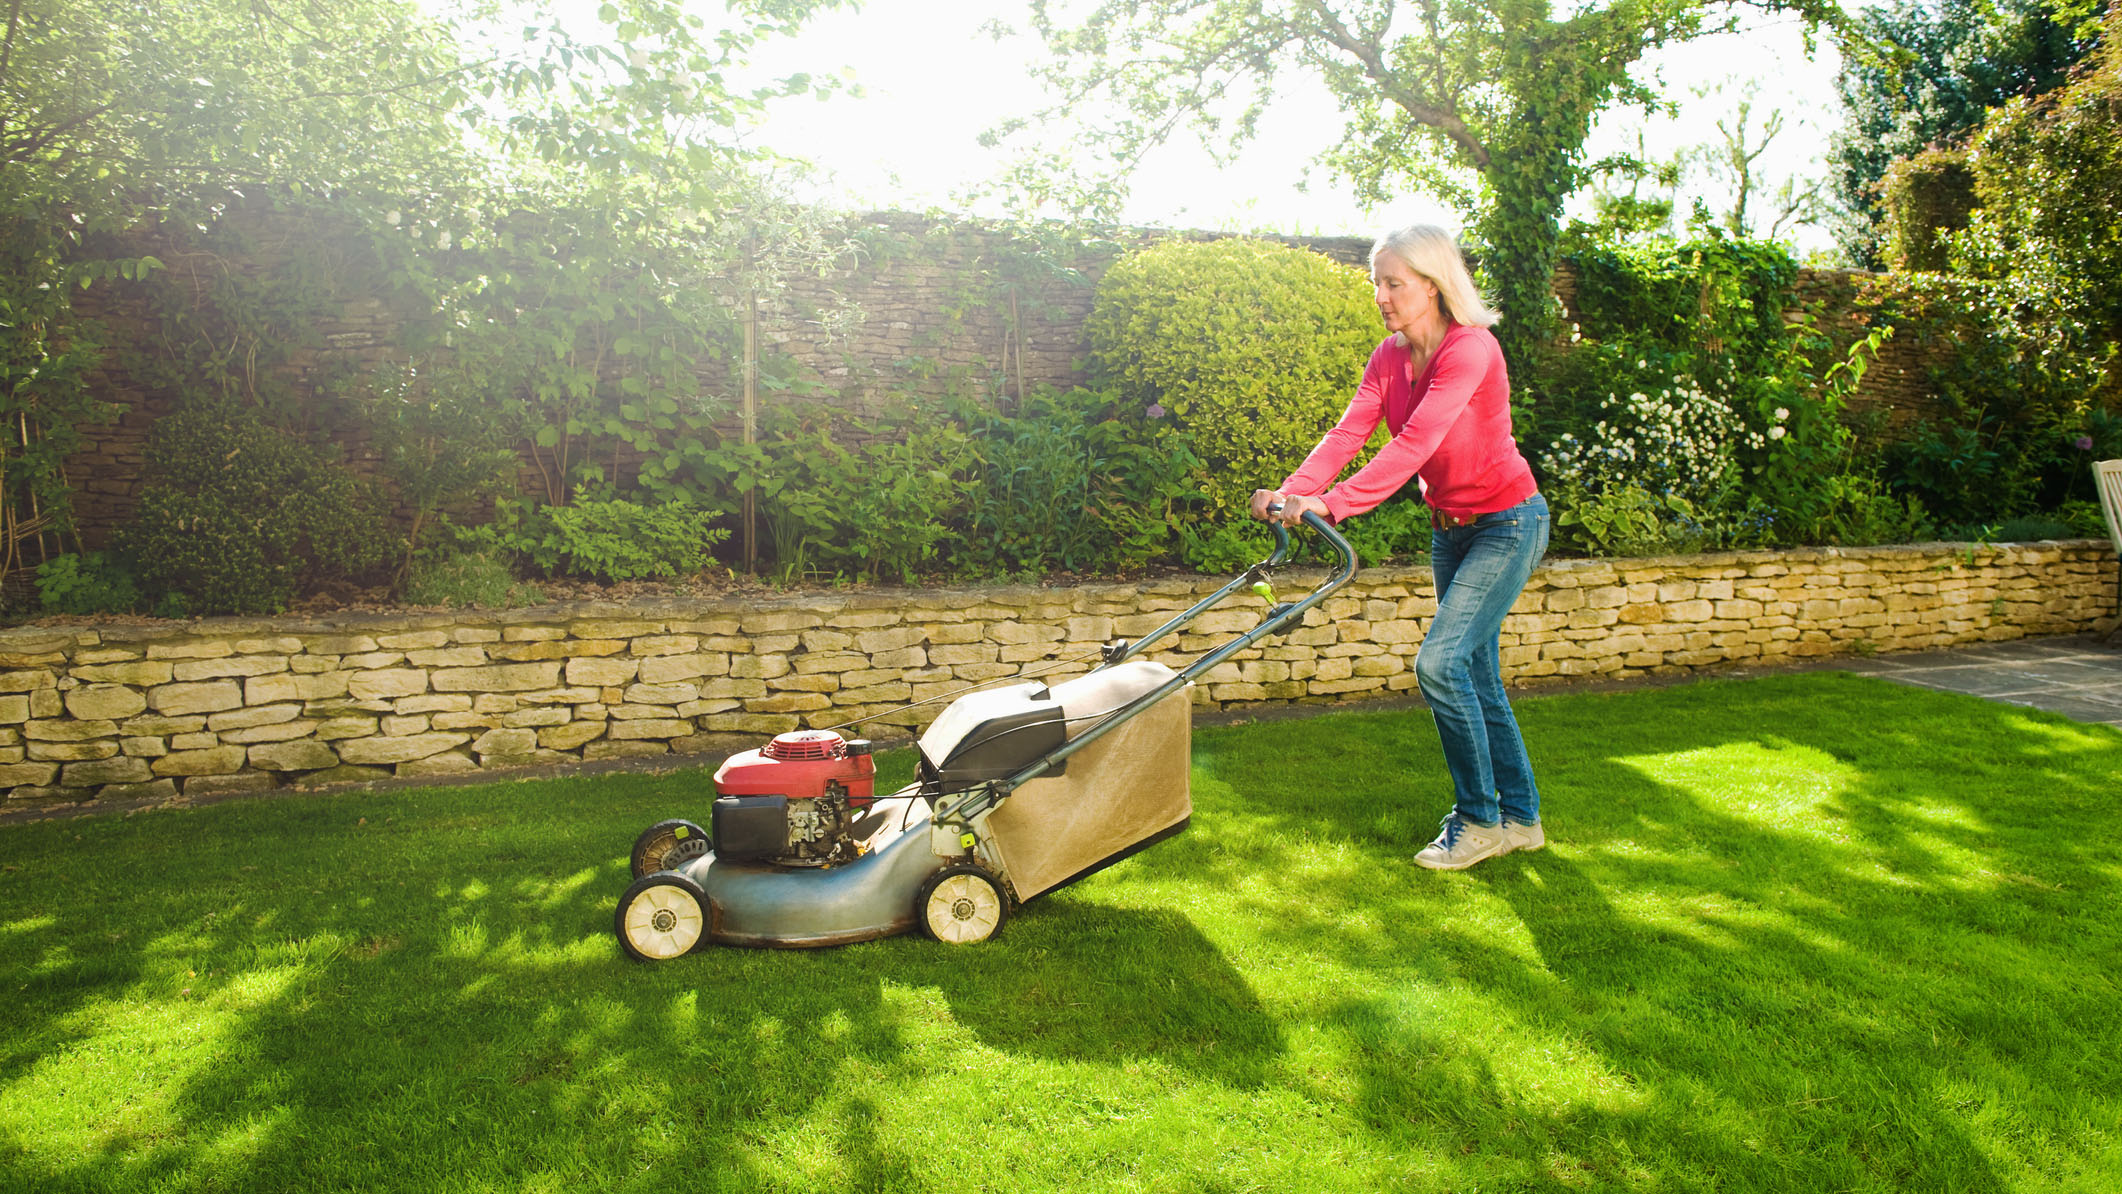 What to do if your lawn mower won't start: A woman wearing a red top uses a lawn mower to cut the grass on a sunny day